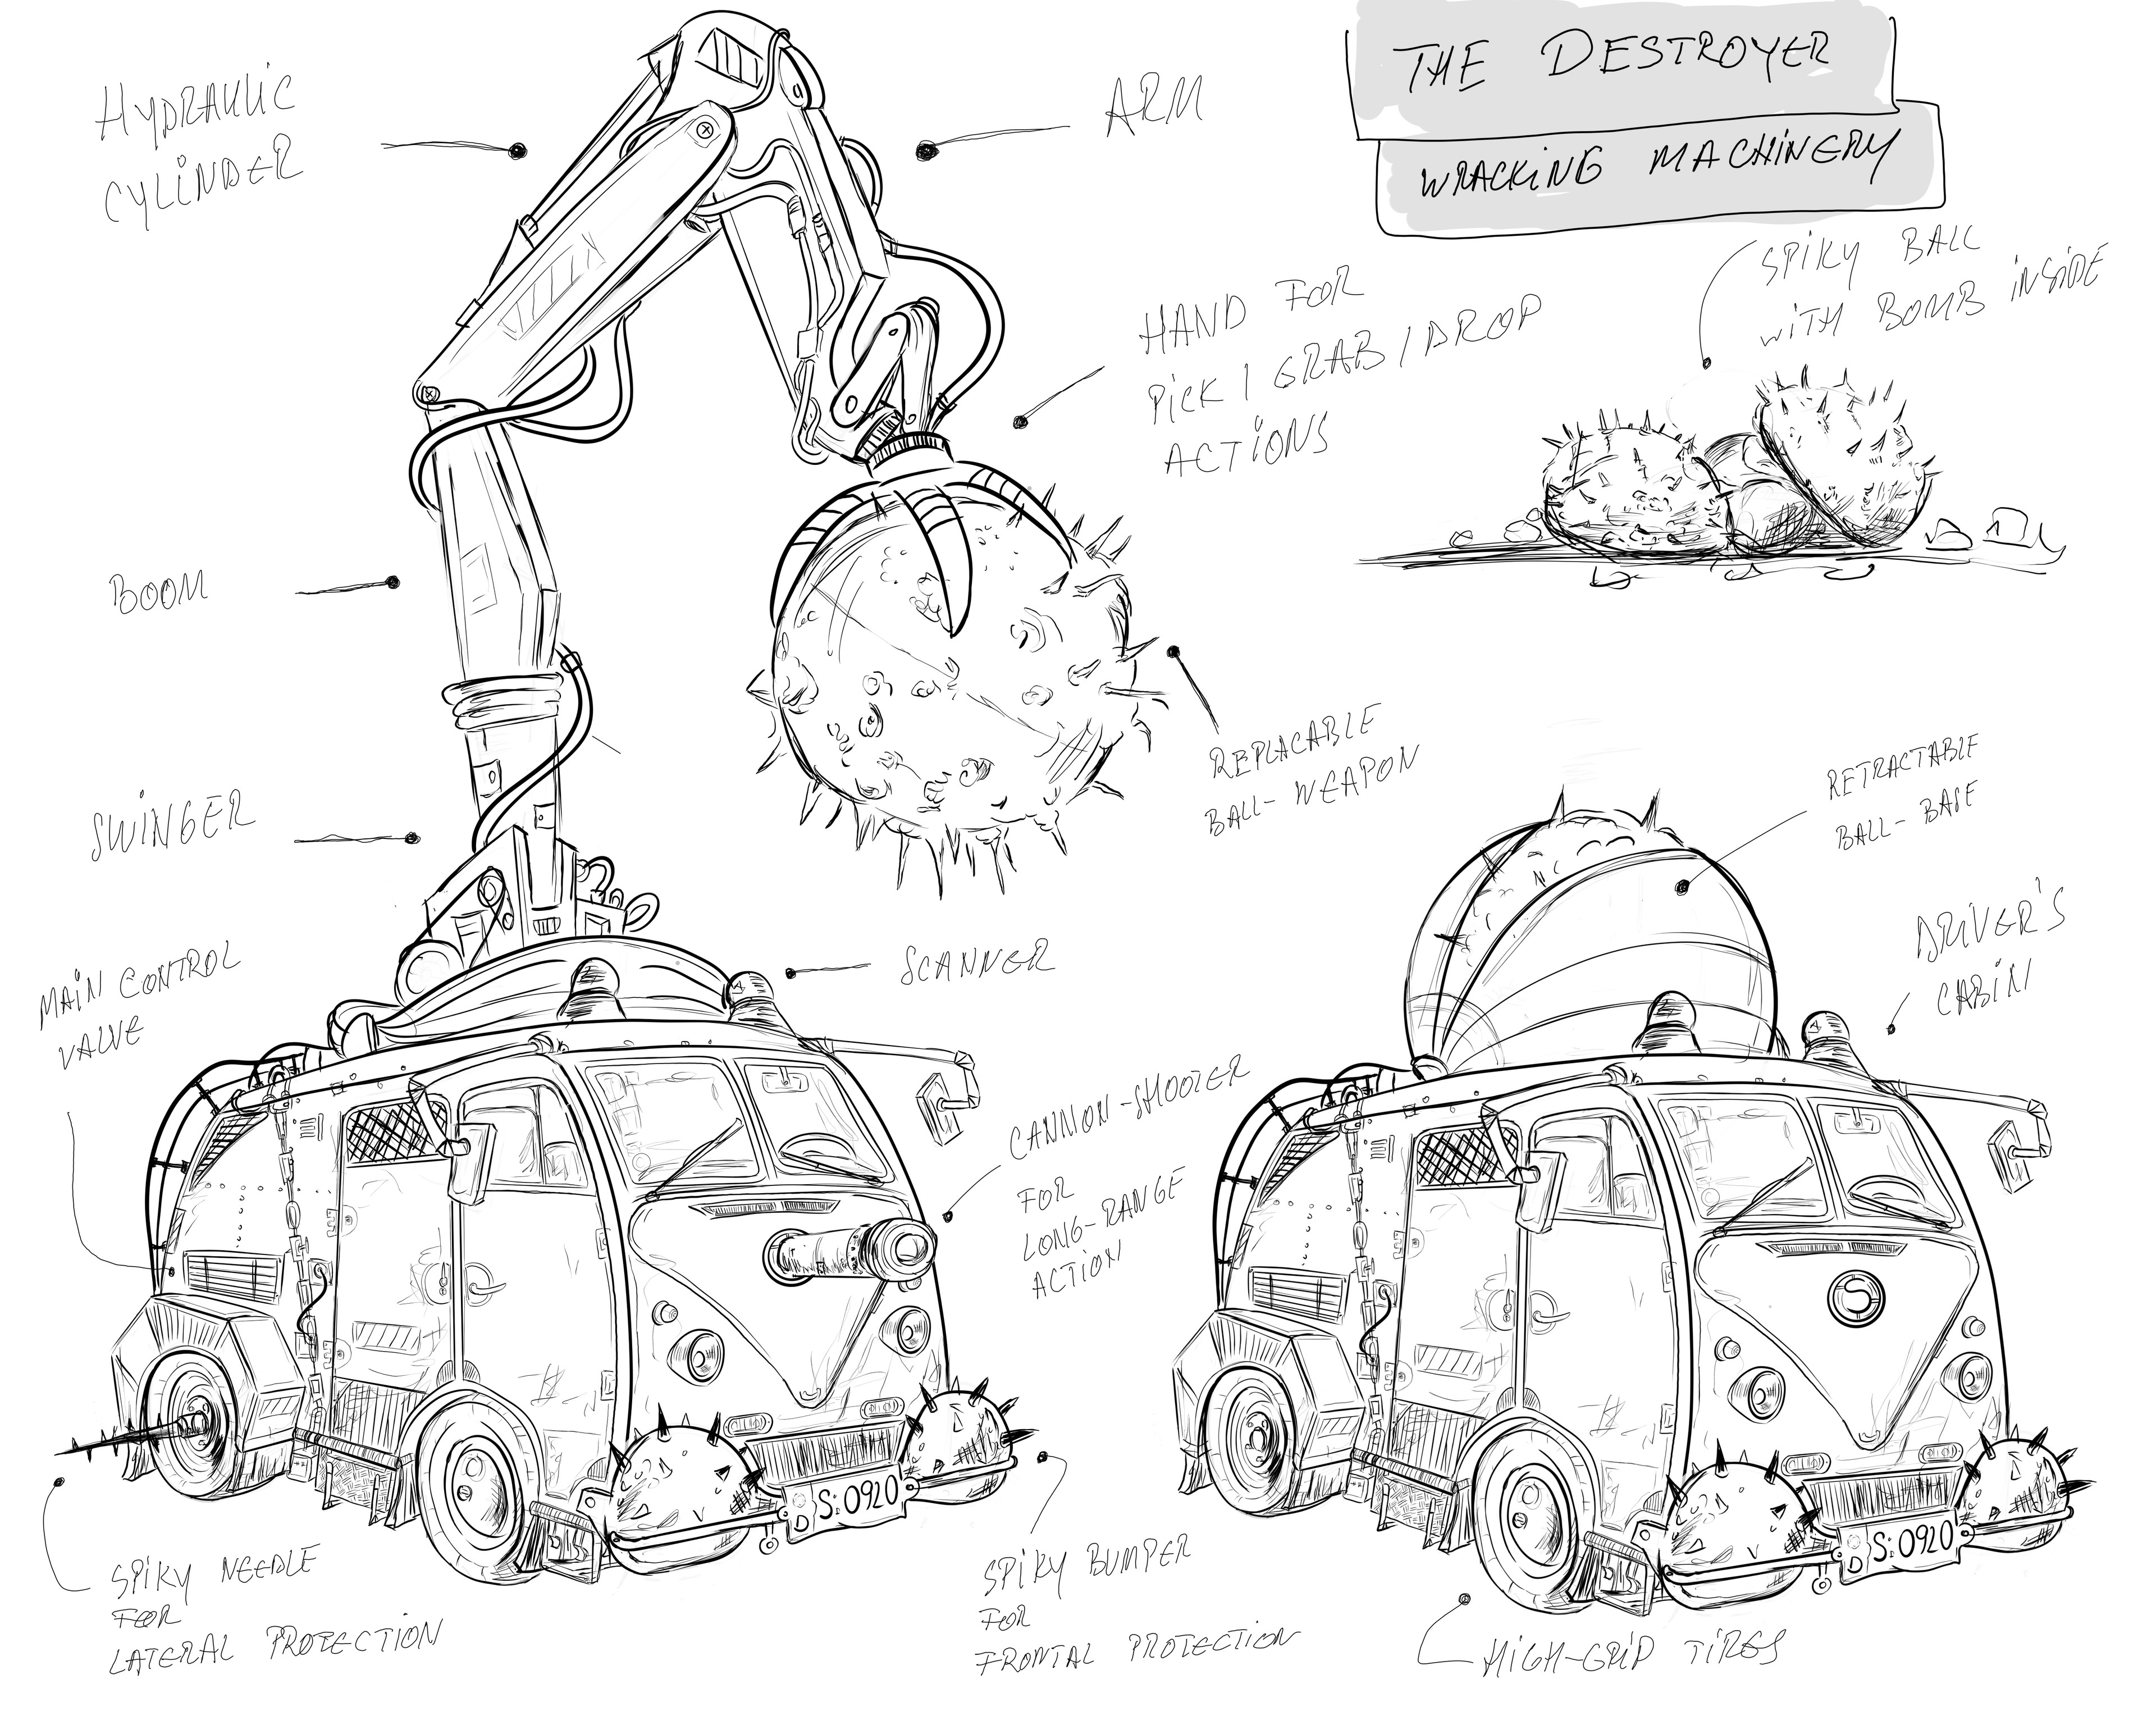 Final Concept - The Destroyer, mechanical features